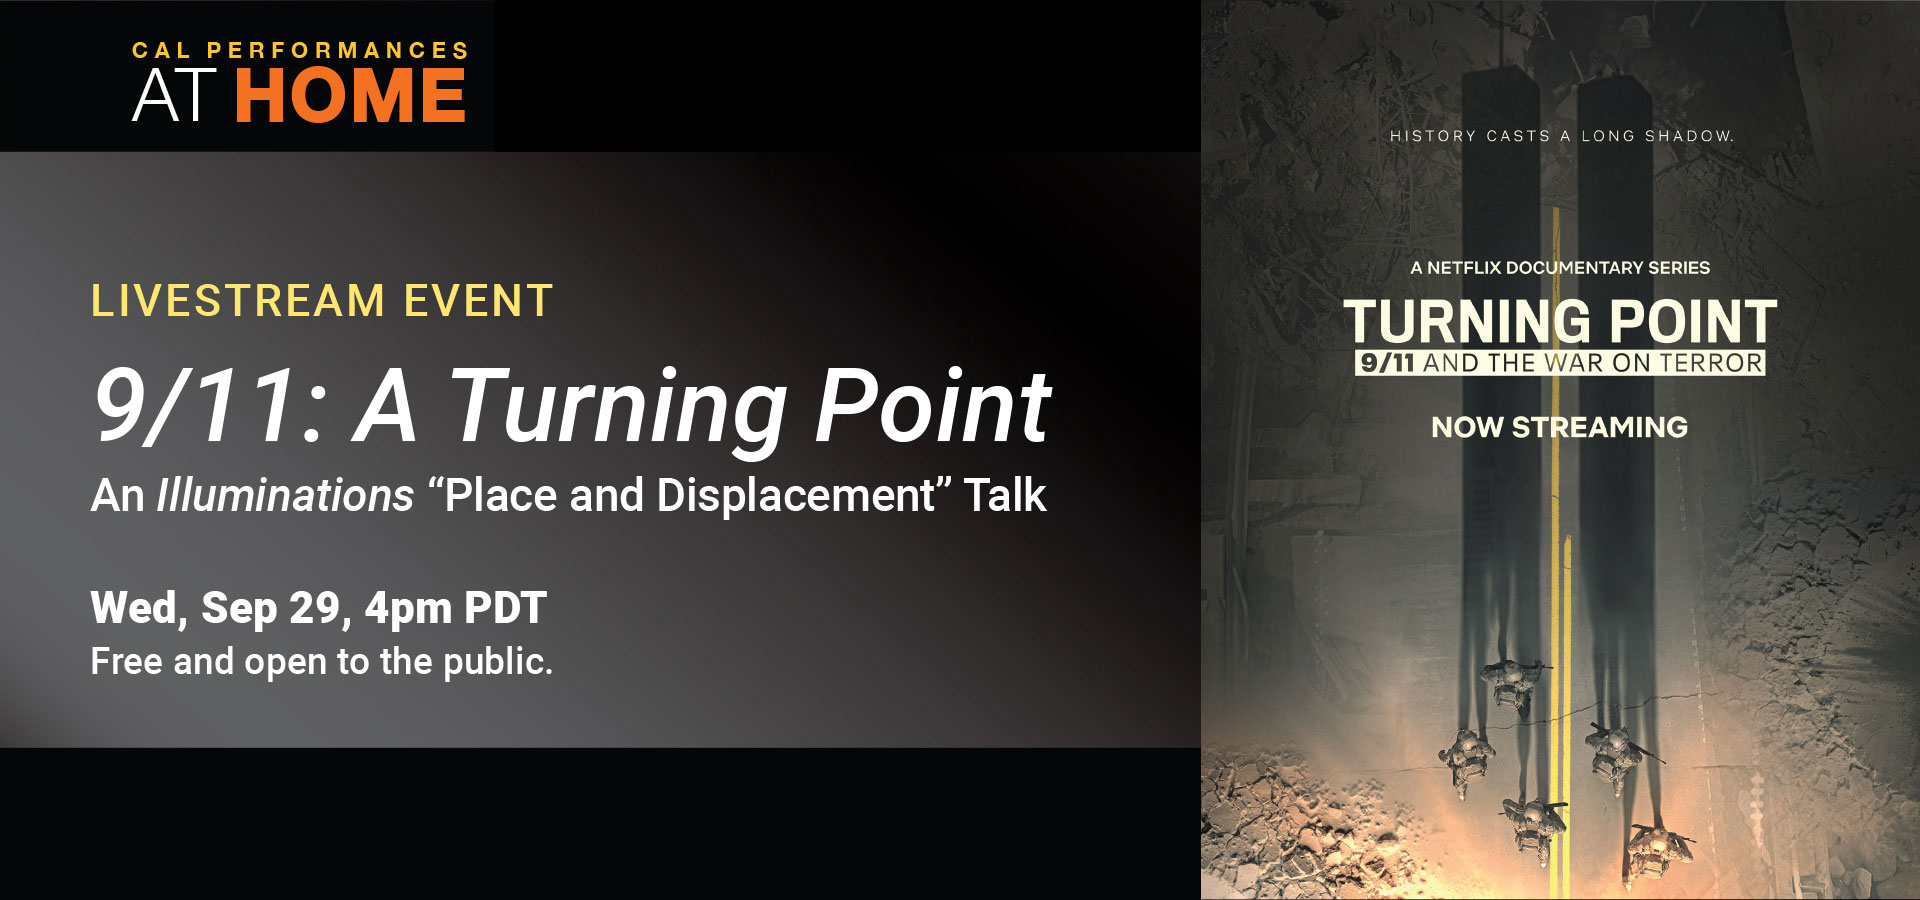 Livestream Event: 9/11: A Turning Point. Sept 29, 4pm PST